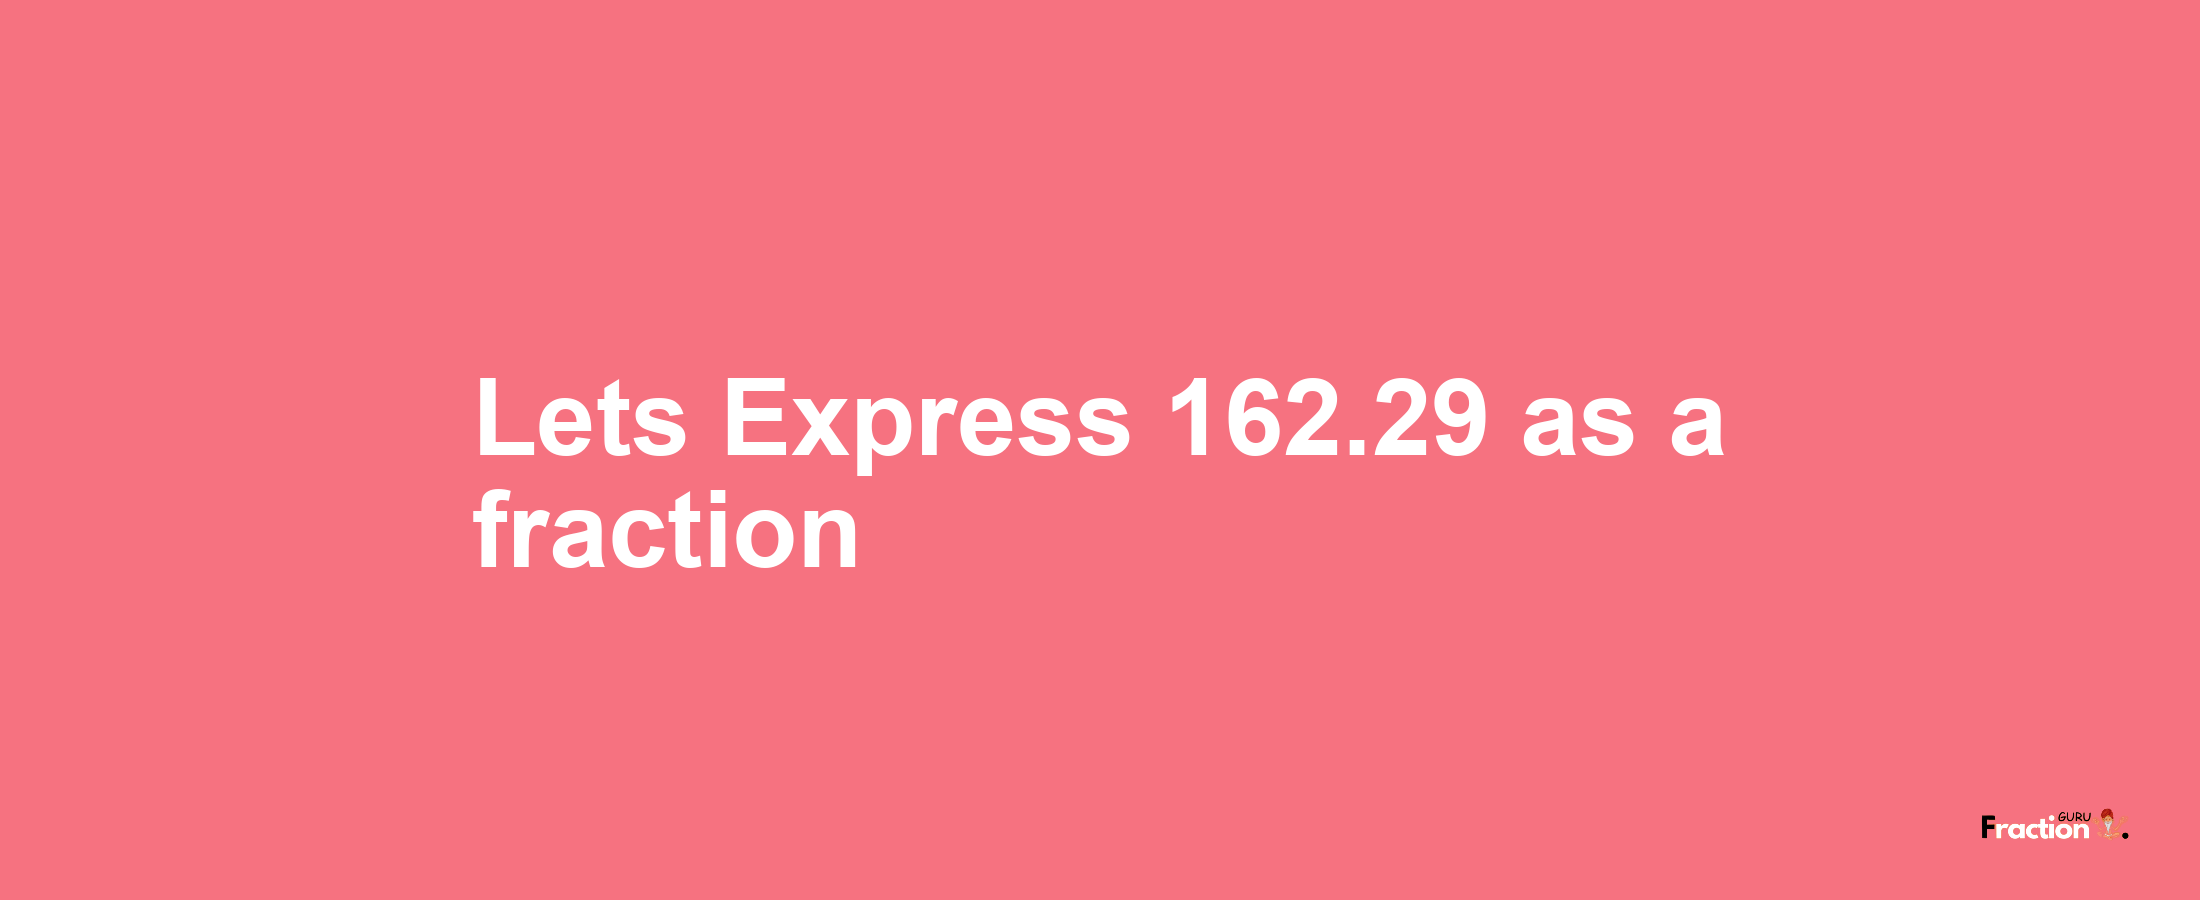 Lets Express 162.29 as afraction